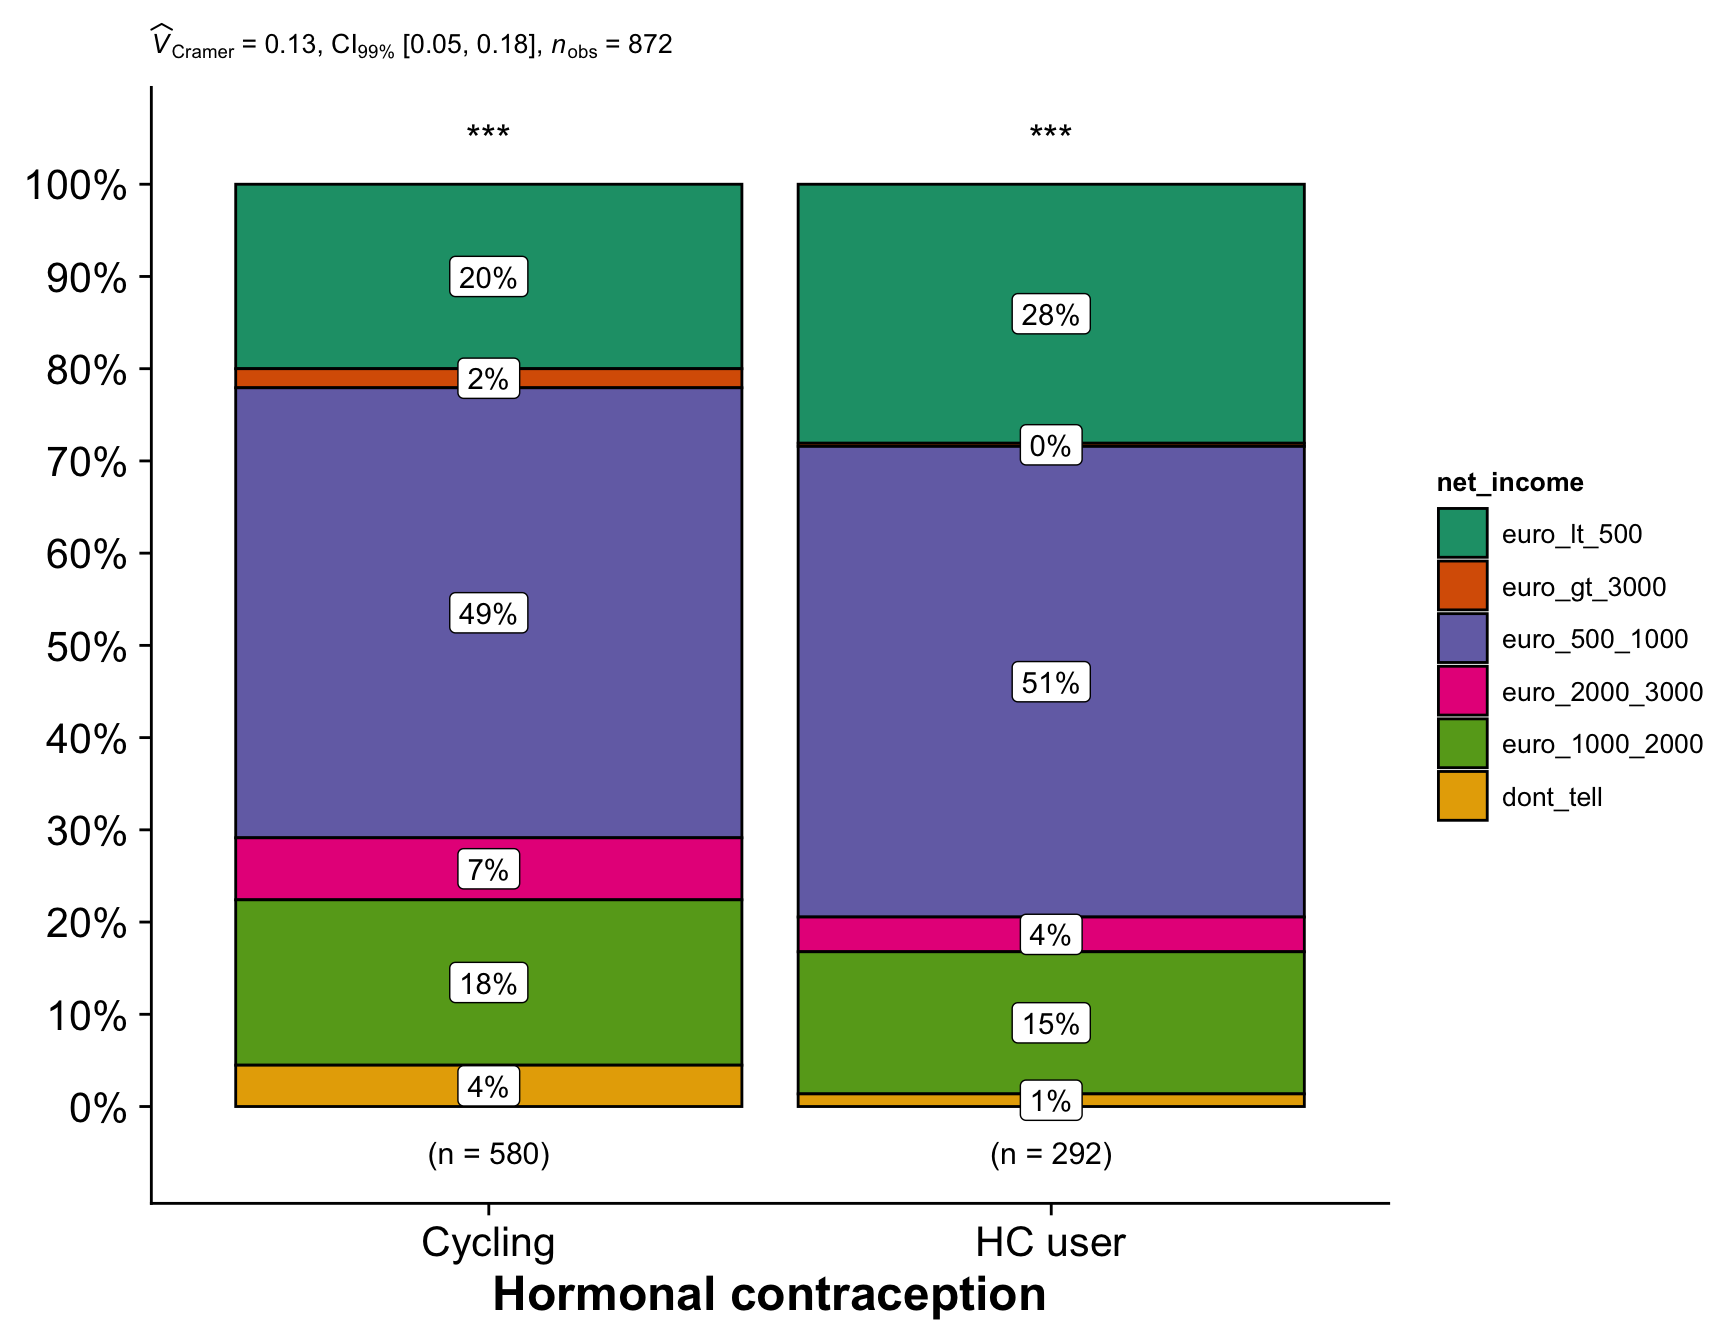 Comparison of the hormonal contraception users (our quasi-control group) with women who are regularly cycling. The plot shows the distribution of categories in each group and the results of a Chi-Square test for equal distribution.